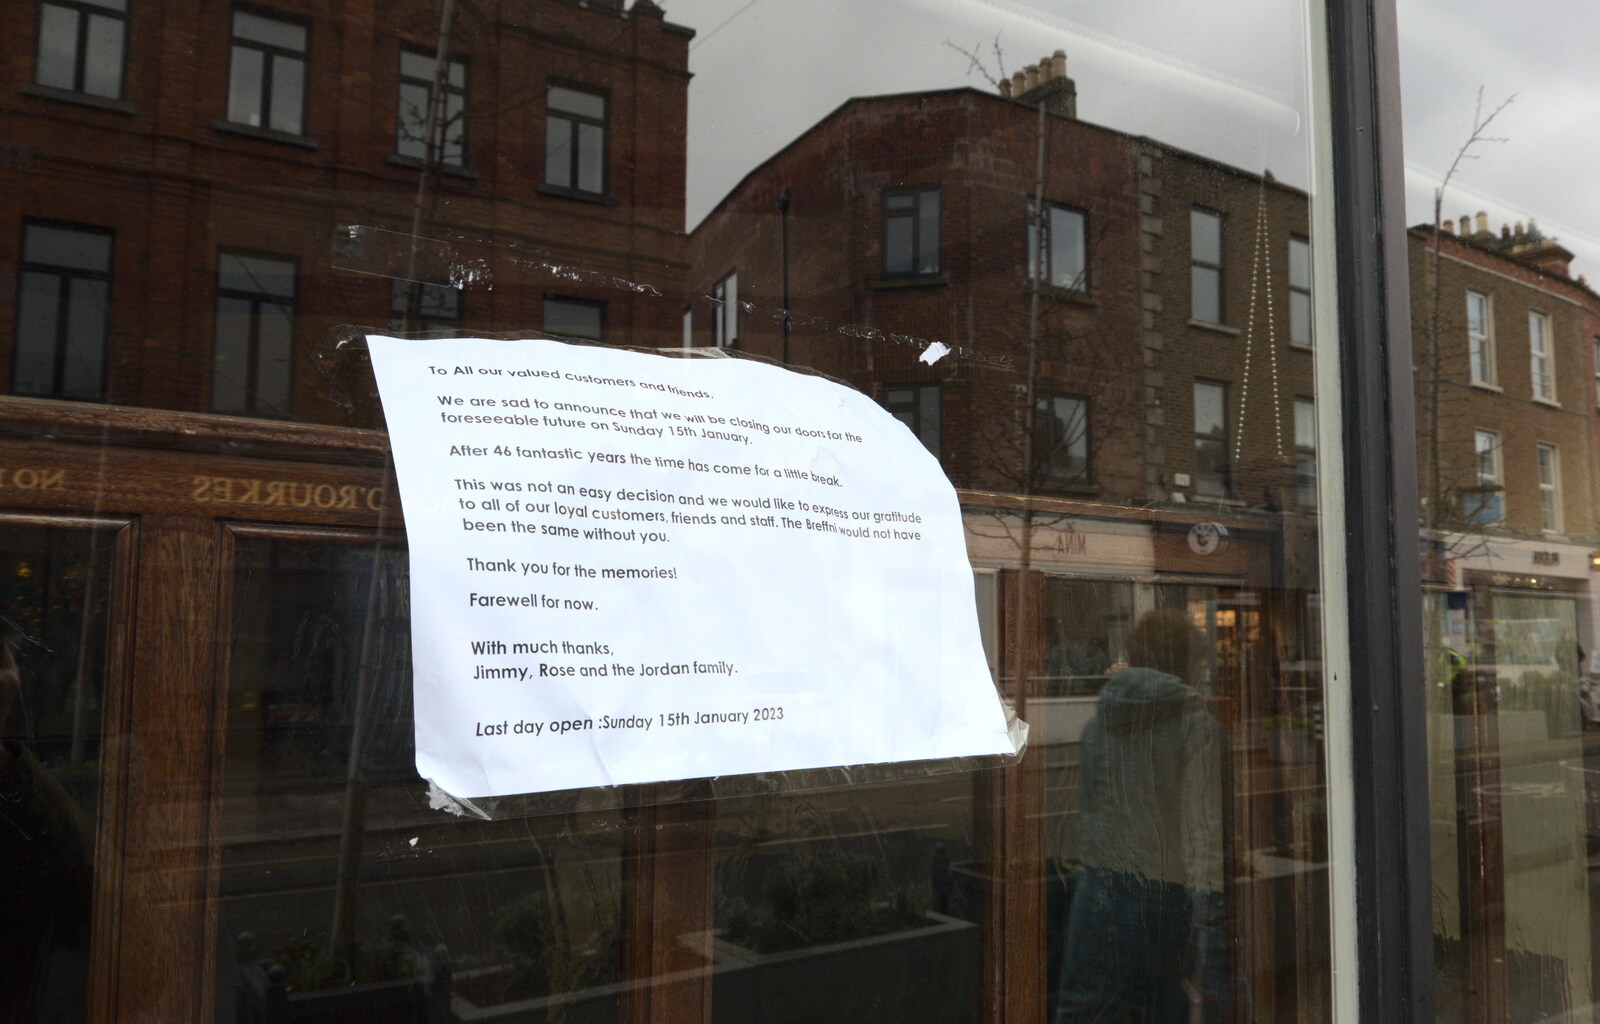 The End of the Breffni, Blackrock, Dublin - 18th February 2023: A letter to customers is stuck up in the window